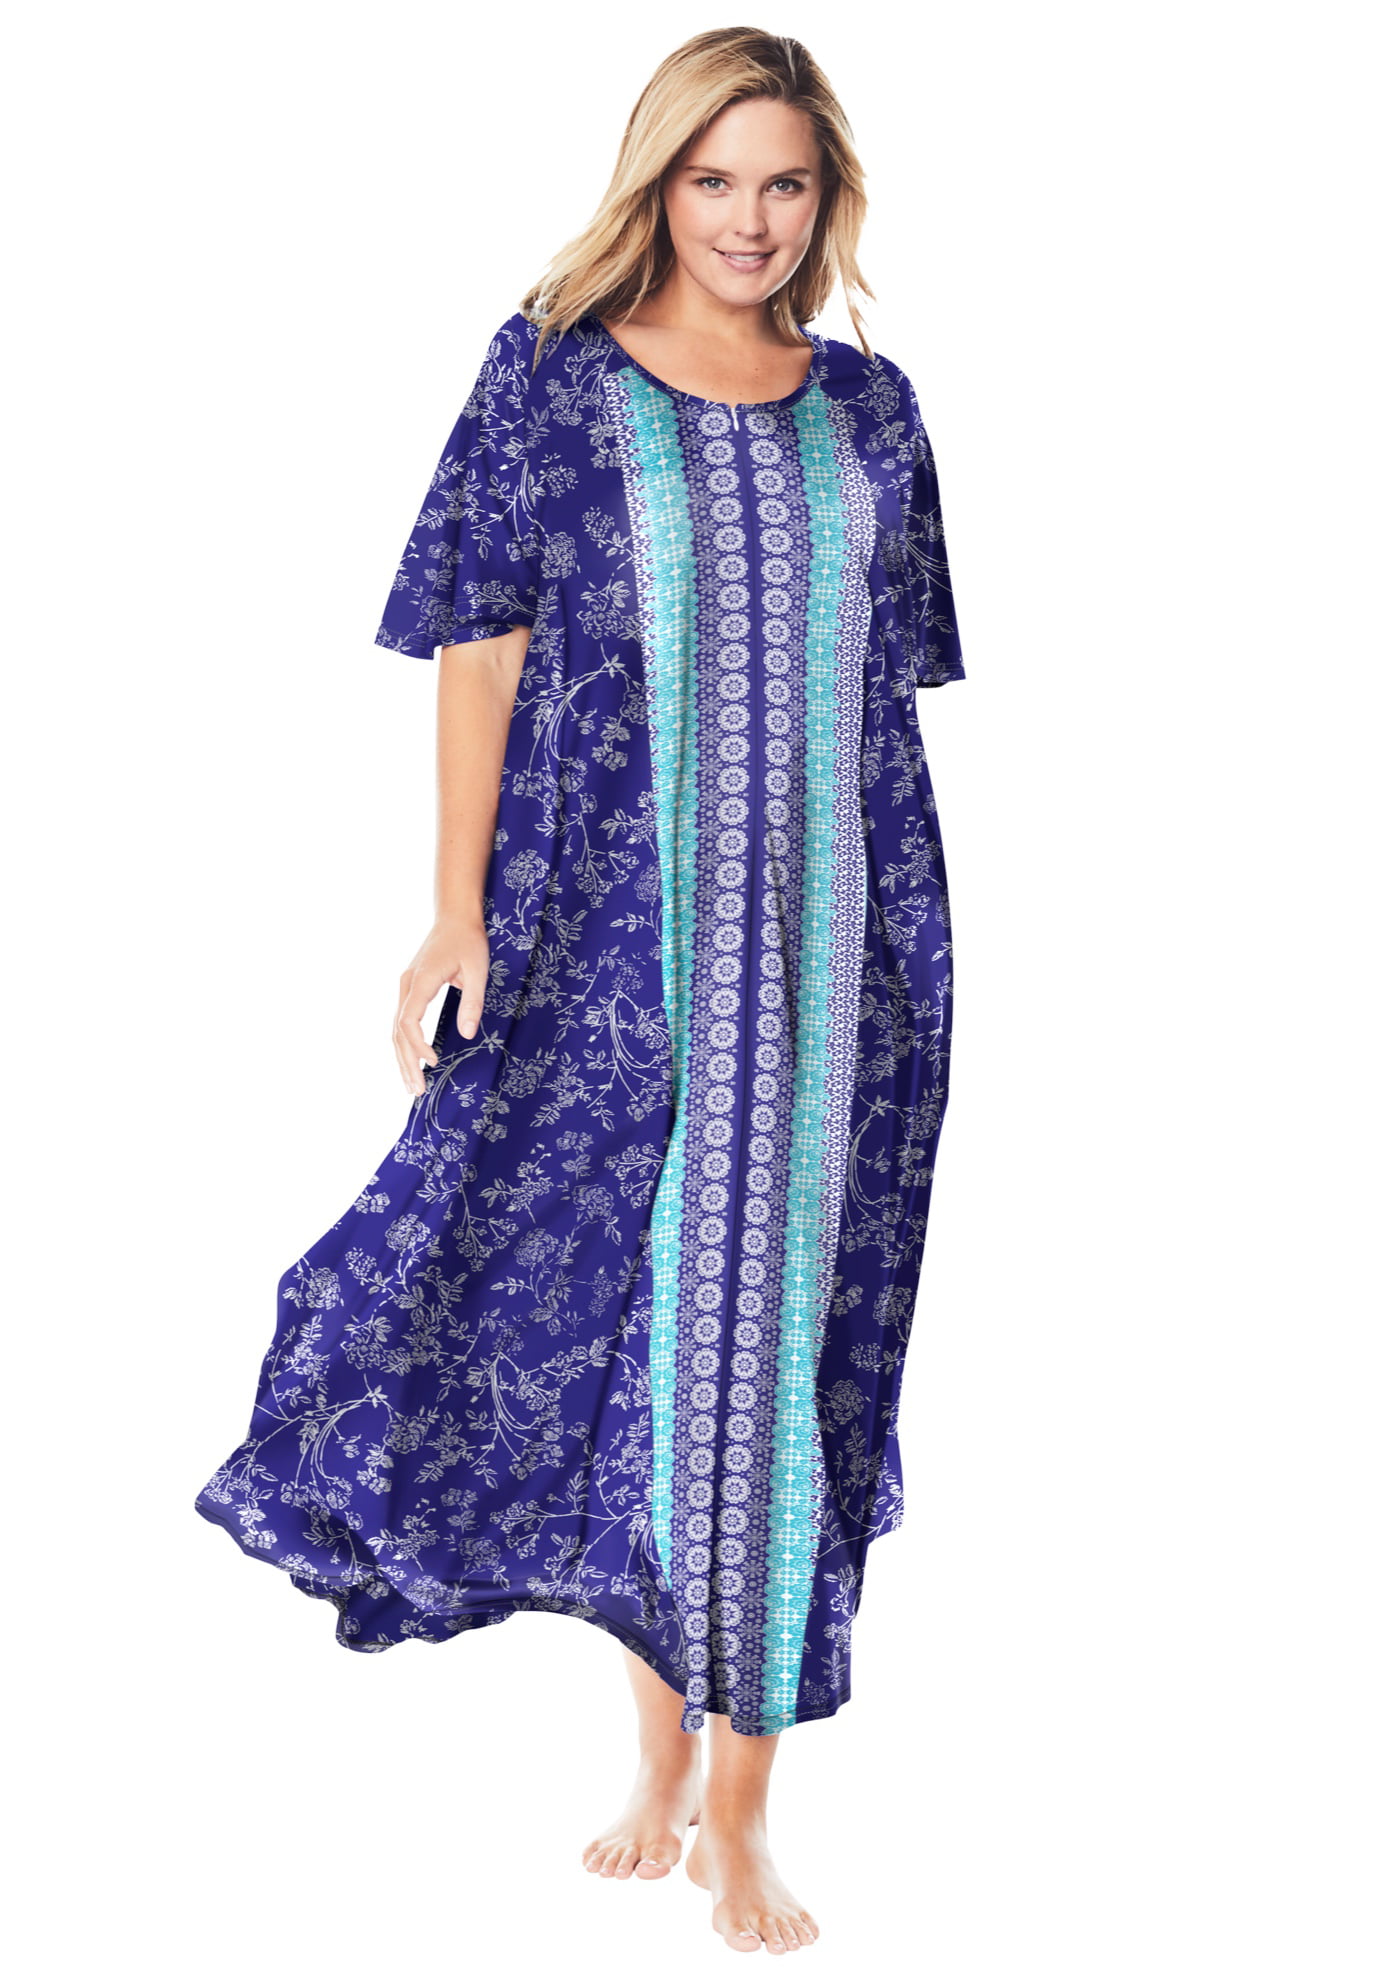 Only Necessities - Only Necessities Women's Plus Size Sweeping Printed ...